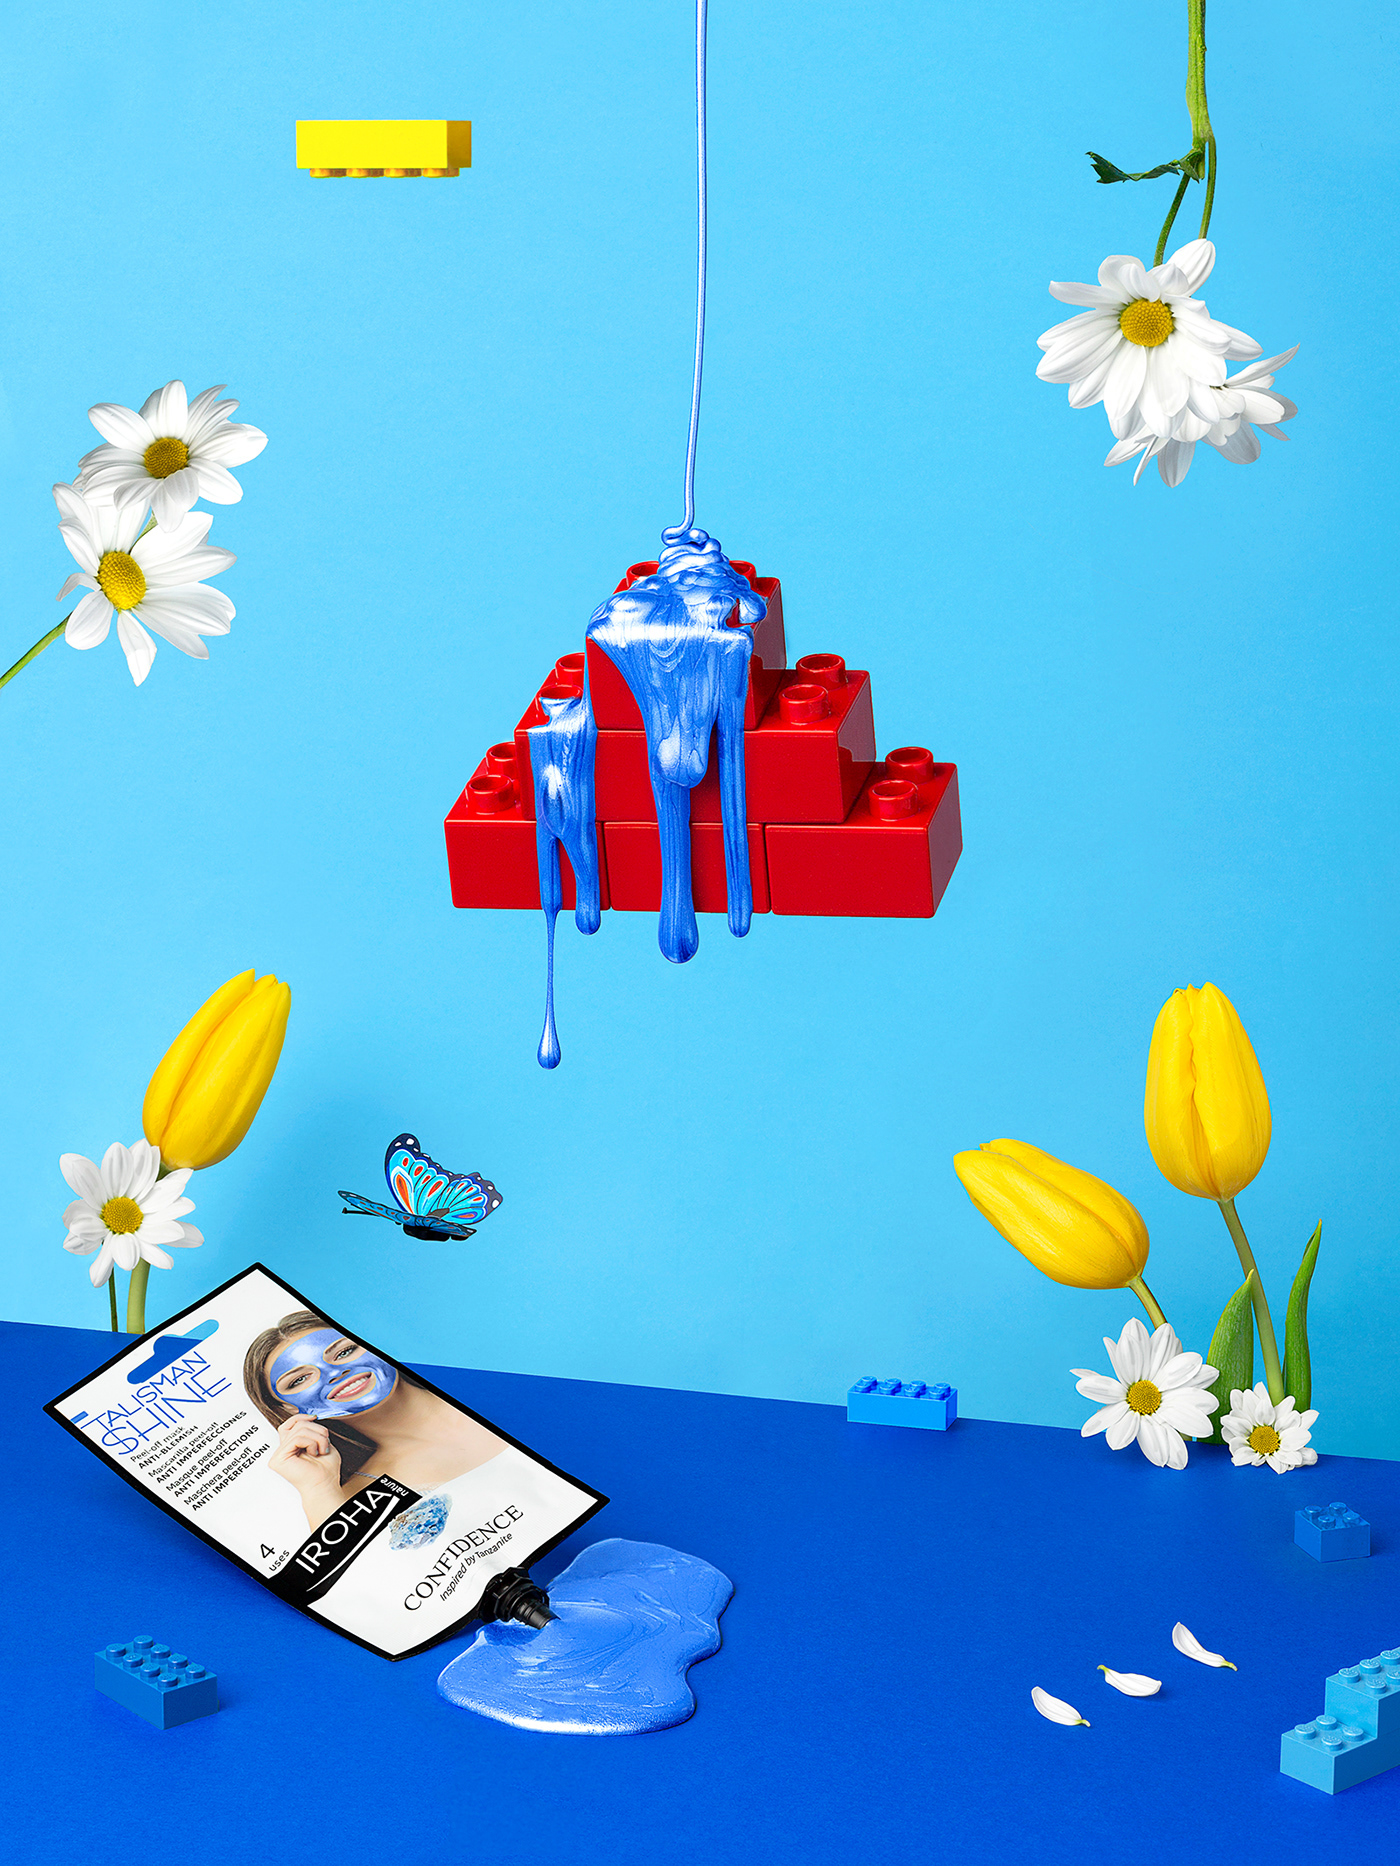 Colorful & playful advertising campaign: blue peel off mask pouring over a lego brick